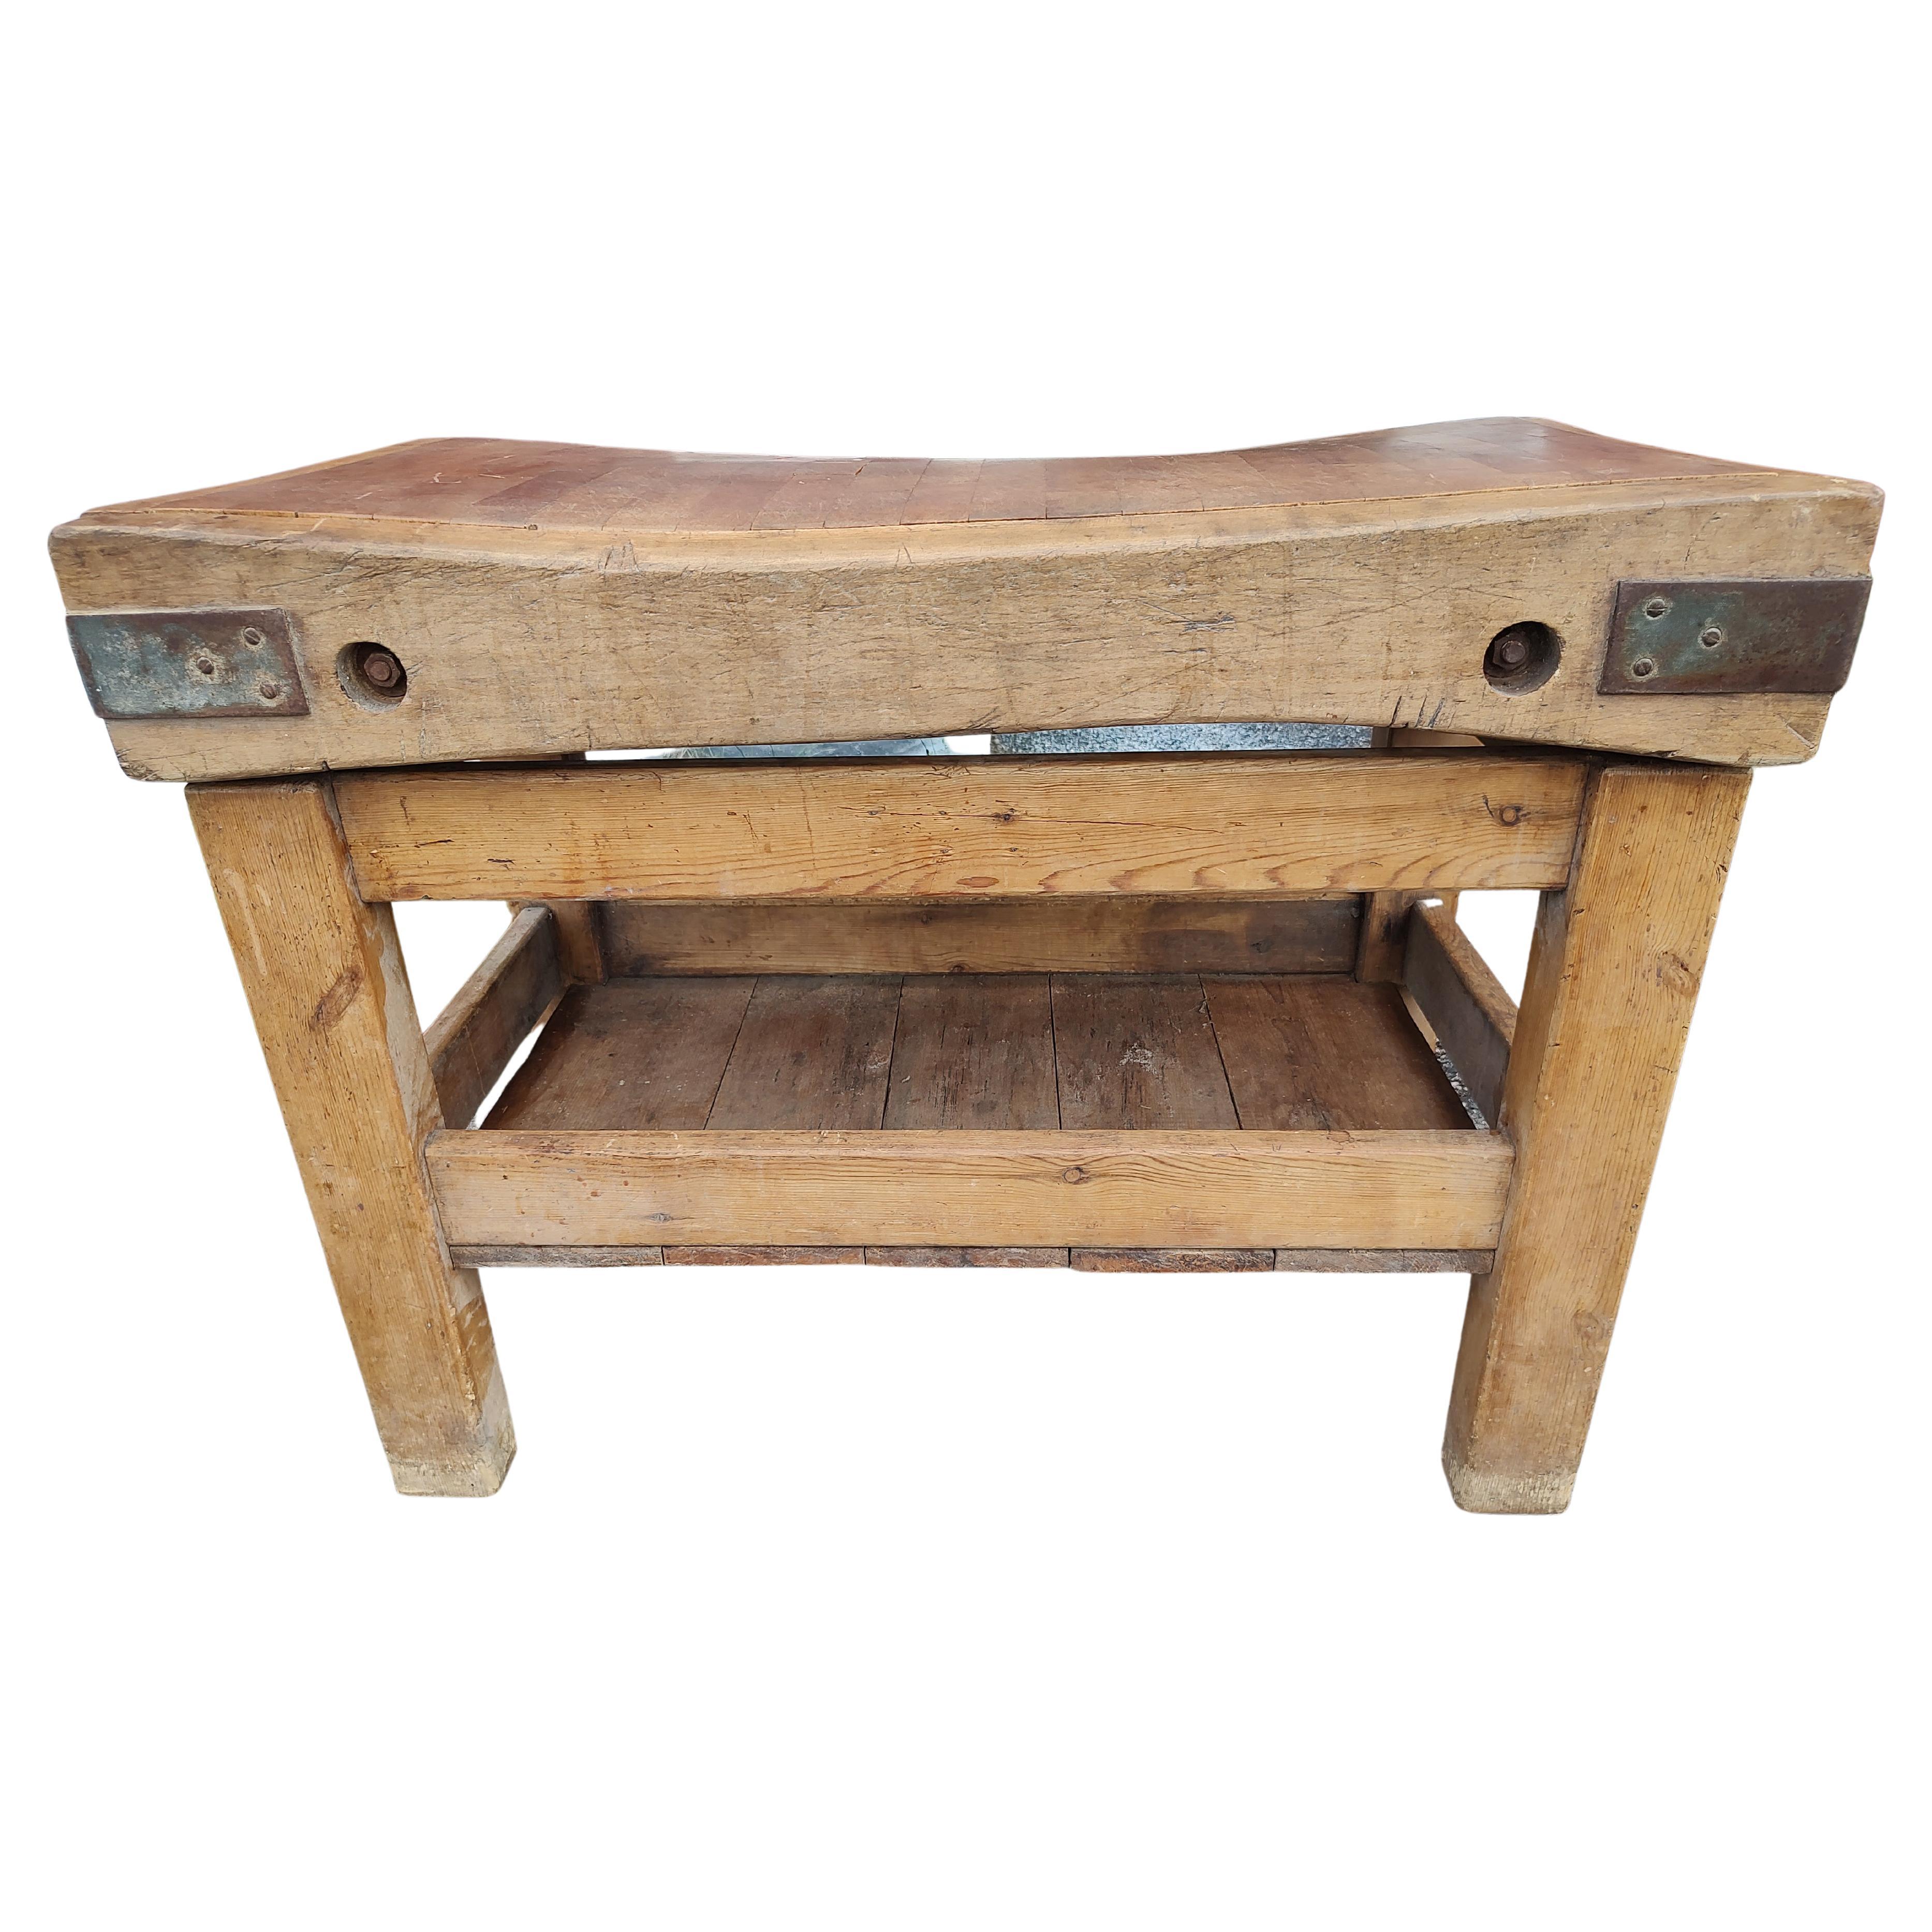 19th Century Industrial Butcher Block Table with Lower Shelf from England